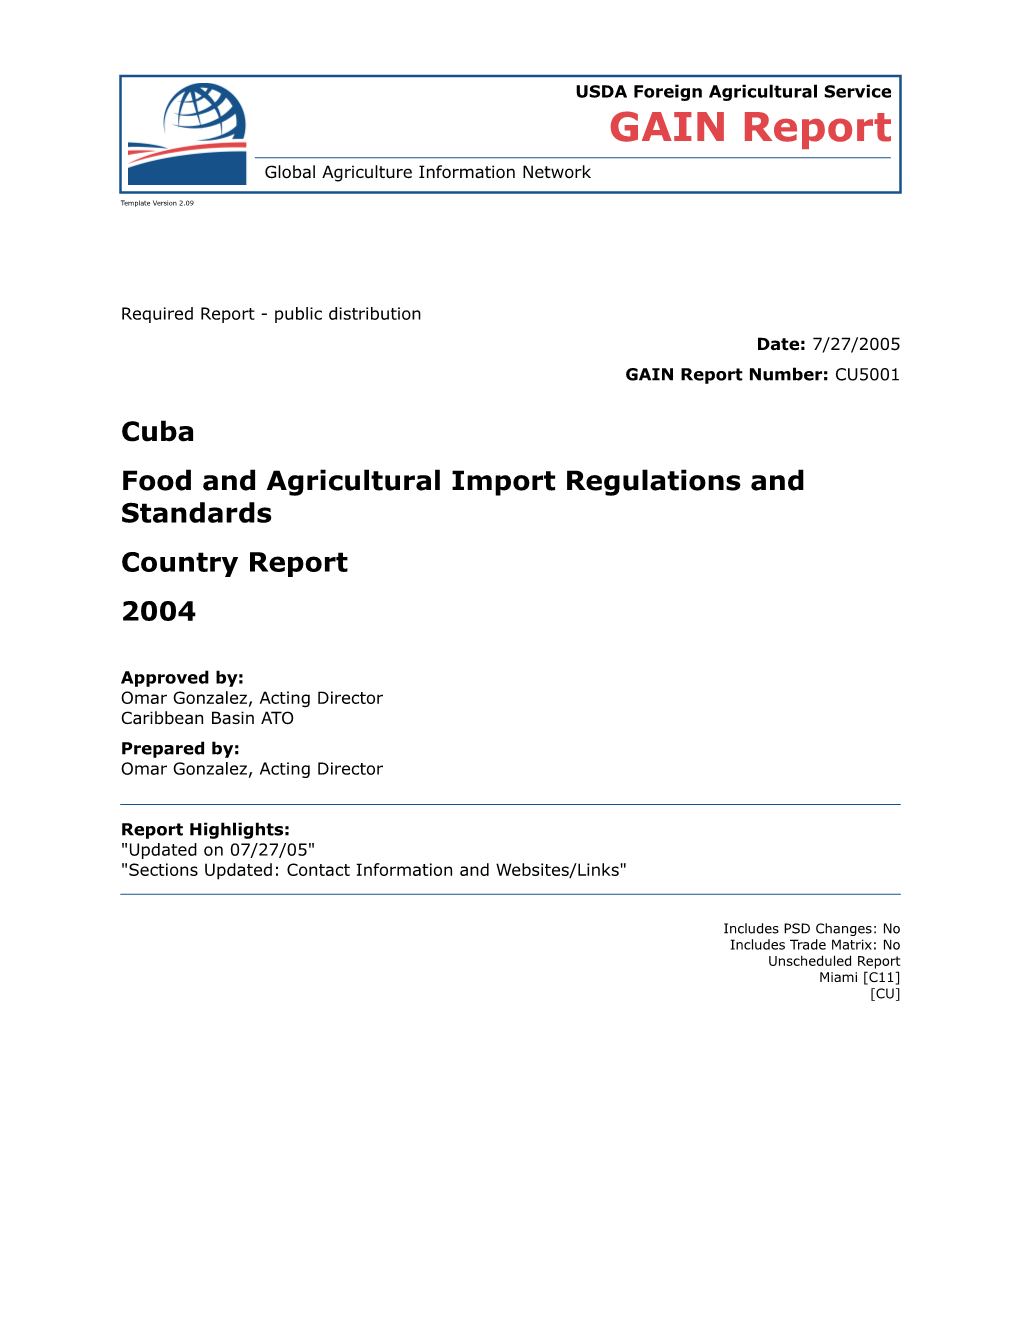 Food and Agricultural Import Regulations and Standards s1